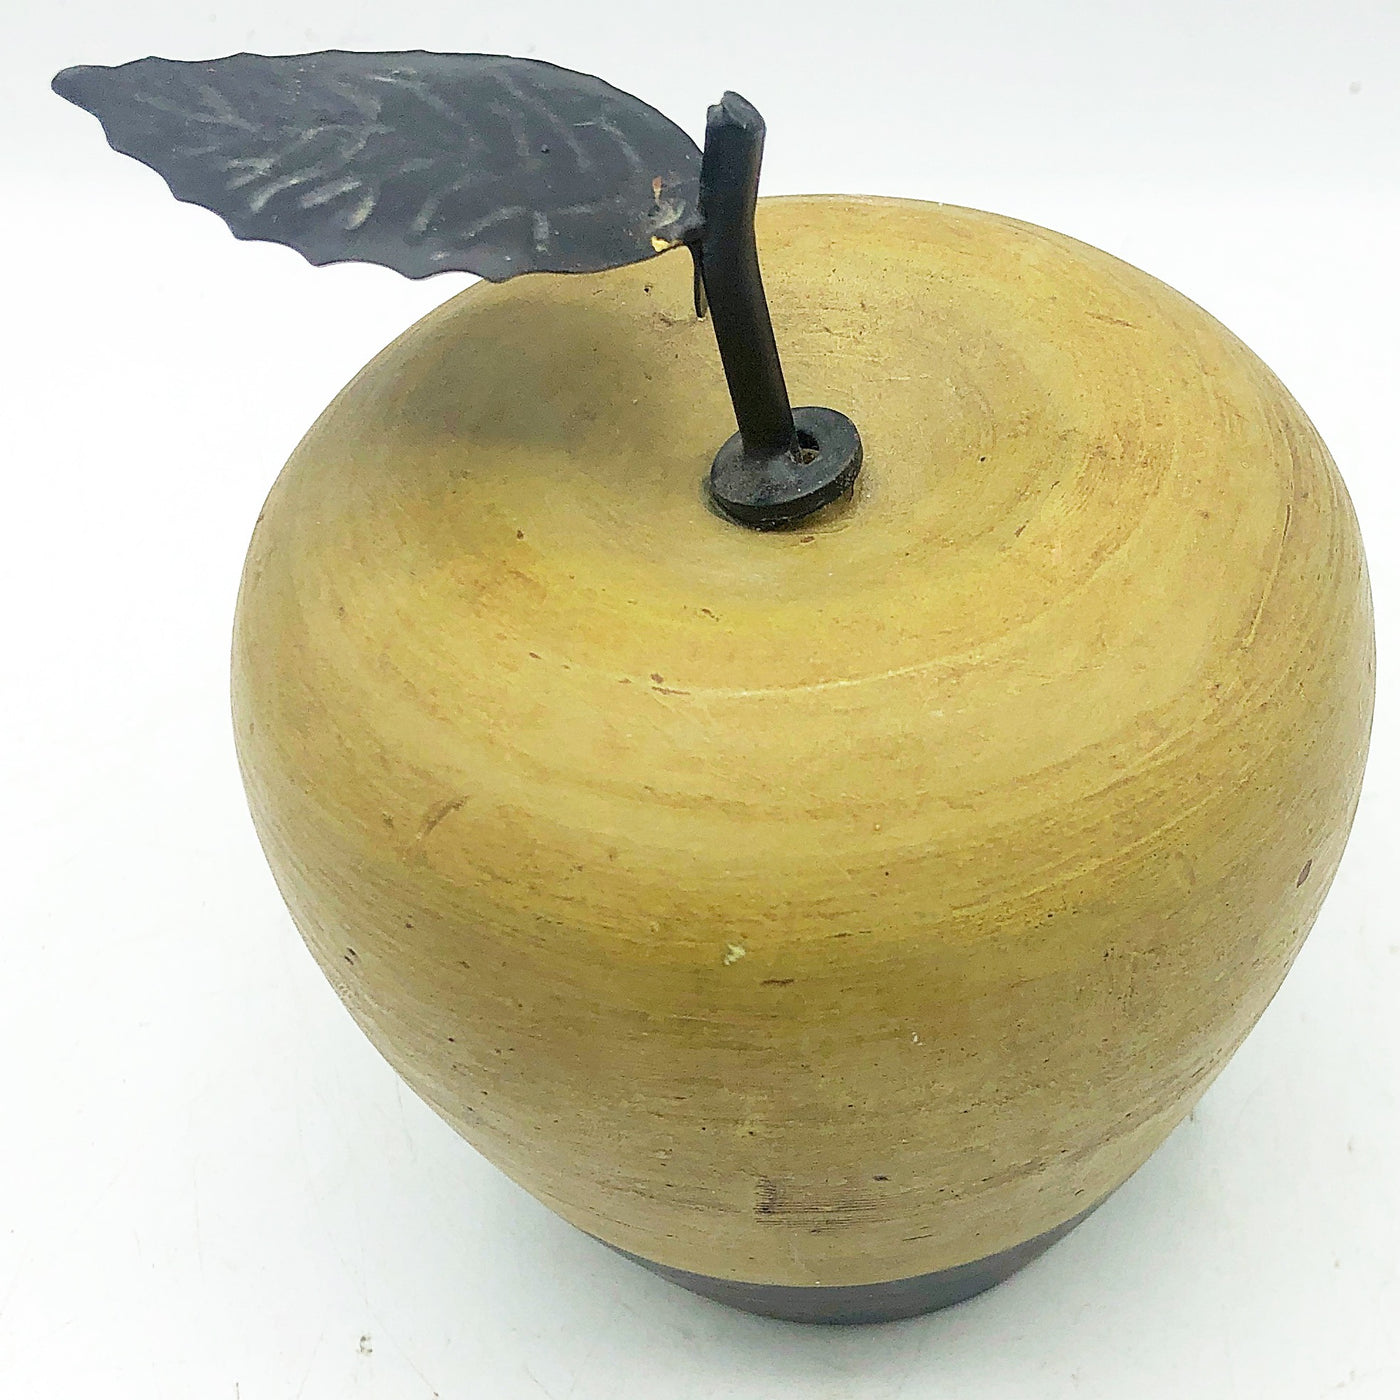 Rustic Two Toned Apple with Metal Leaf